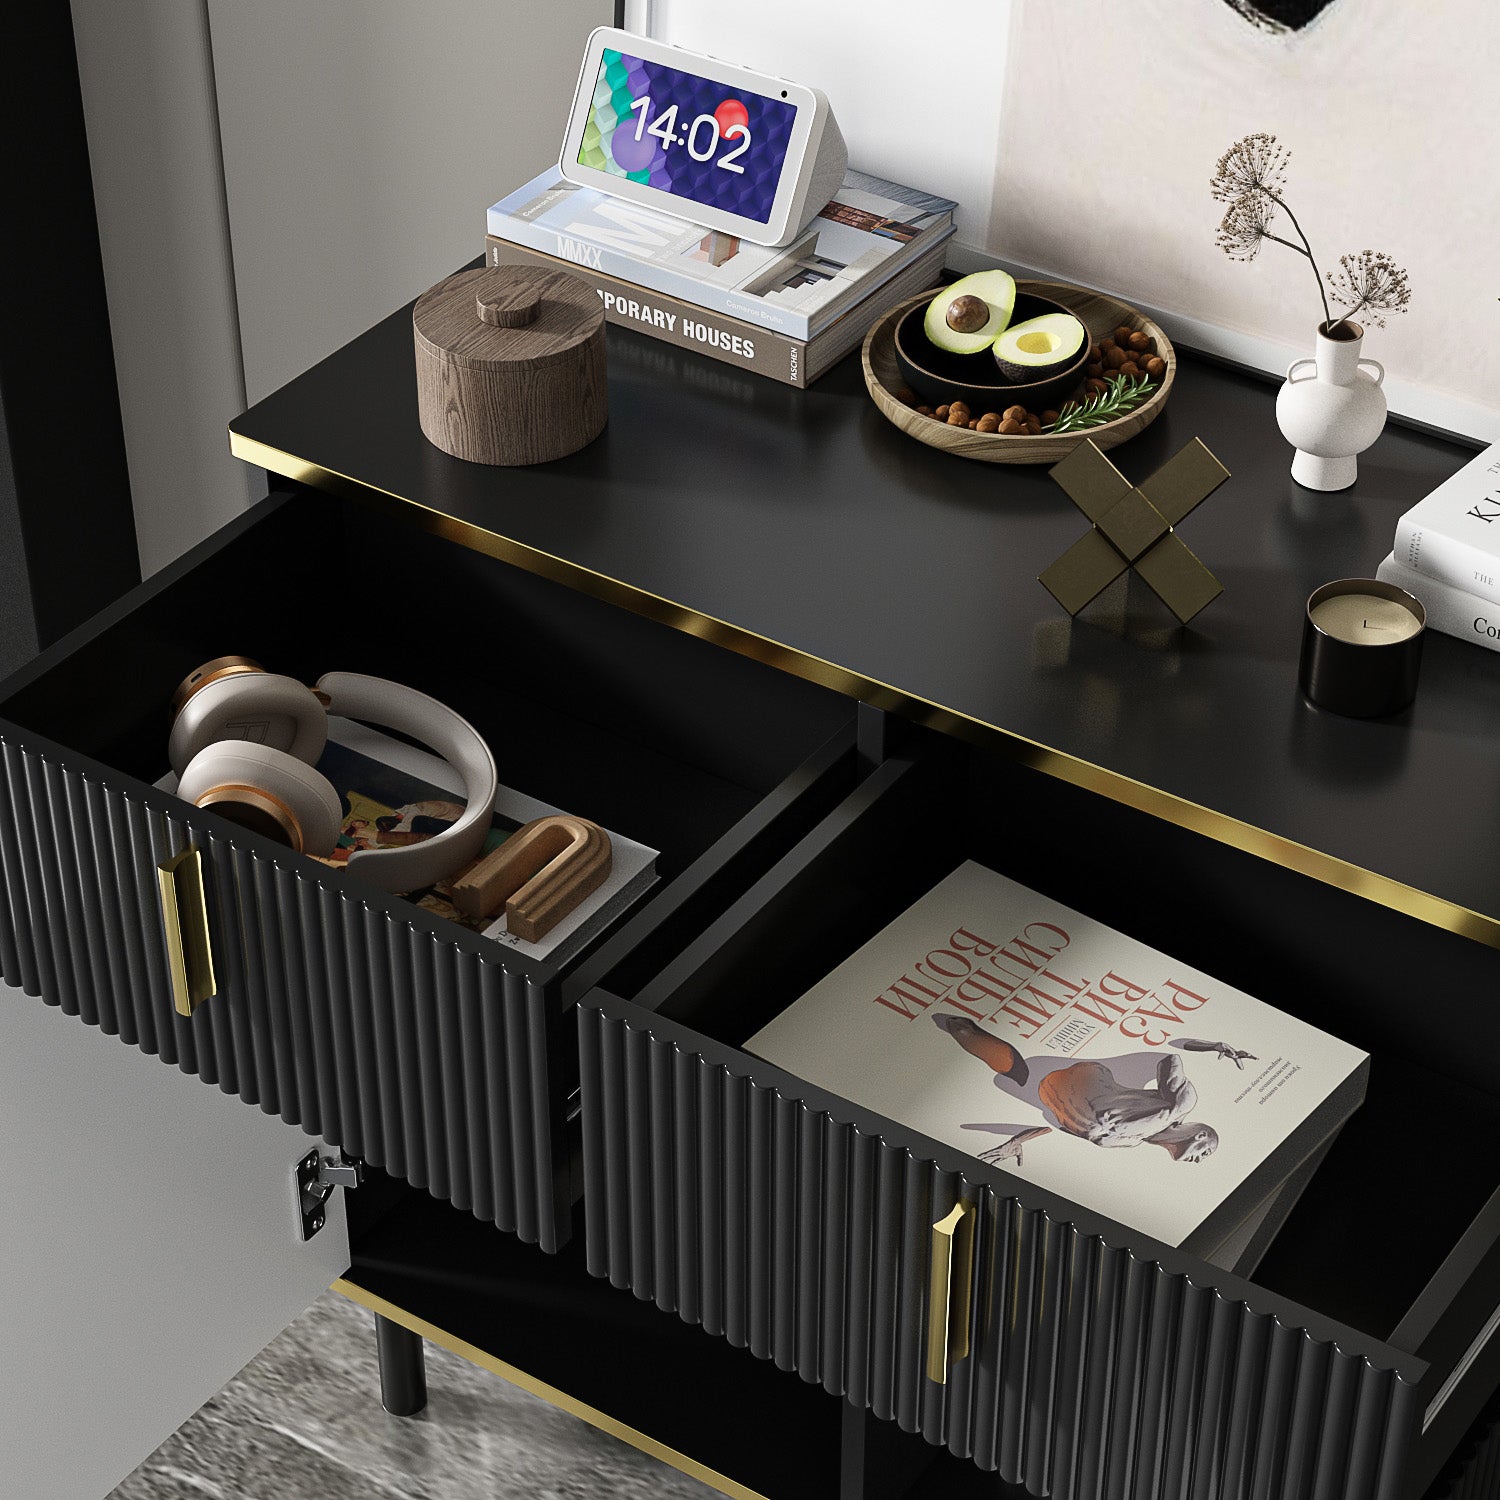 Wide Sideboard Buffet Storage Cabinet in Black with Drawer & Pop-up Doors